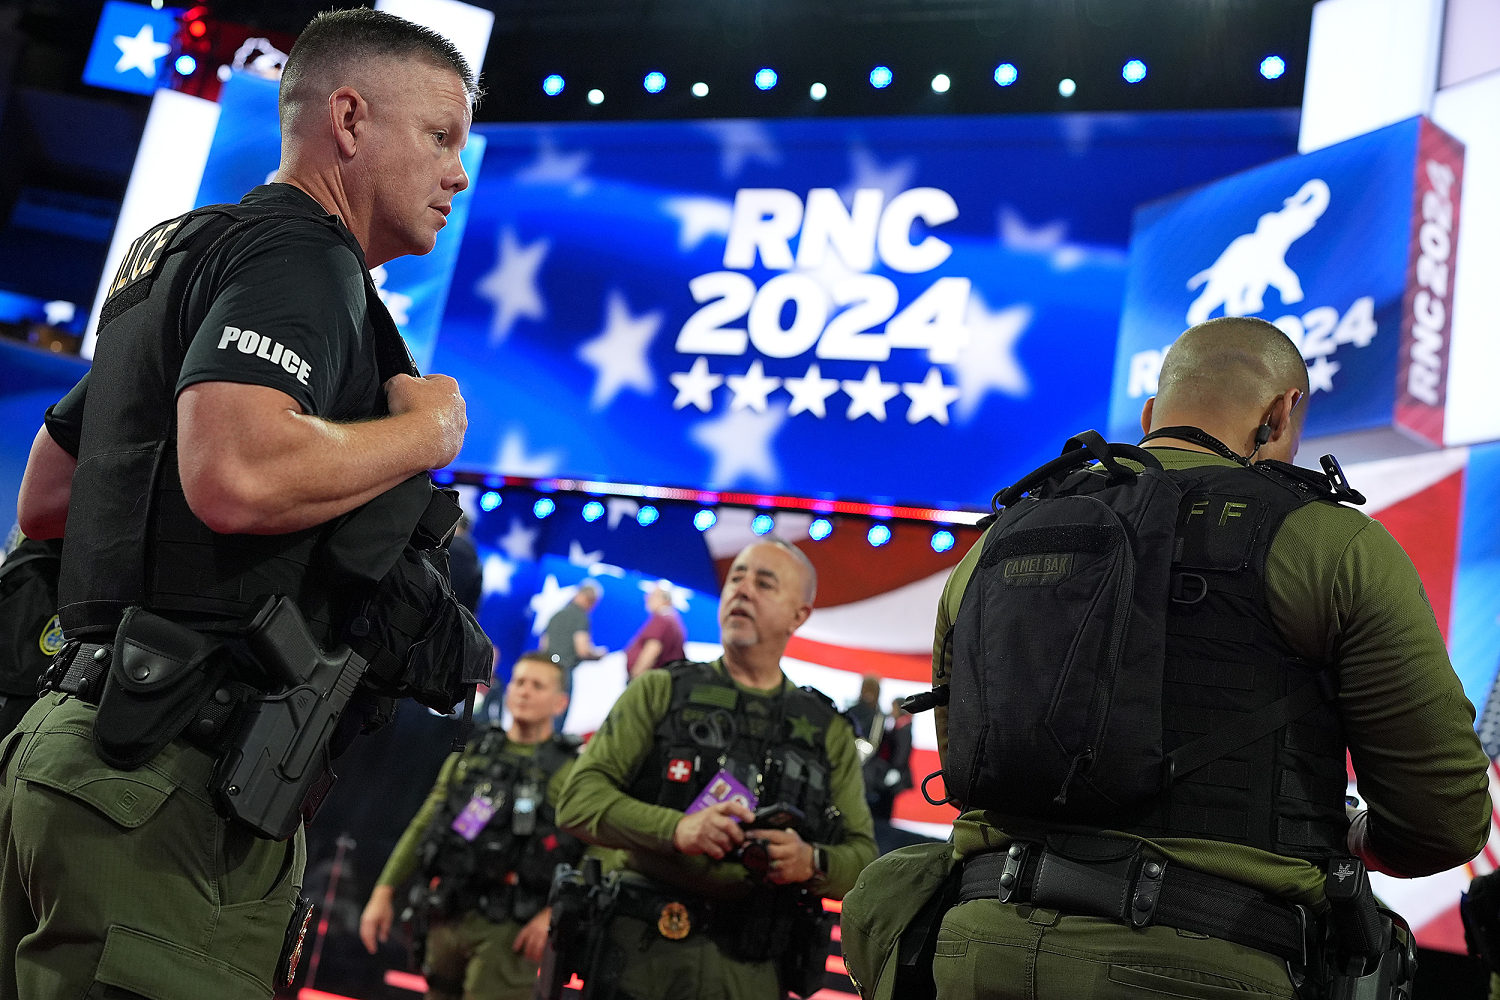 Republican National Convention kicks off after Trump rally shooting